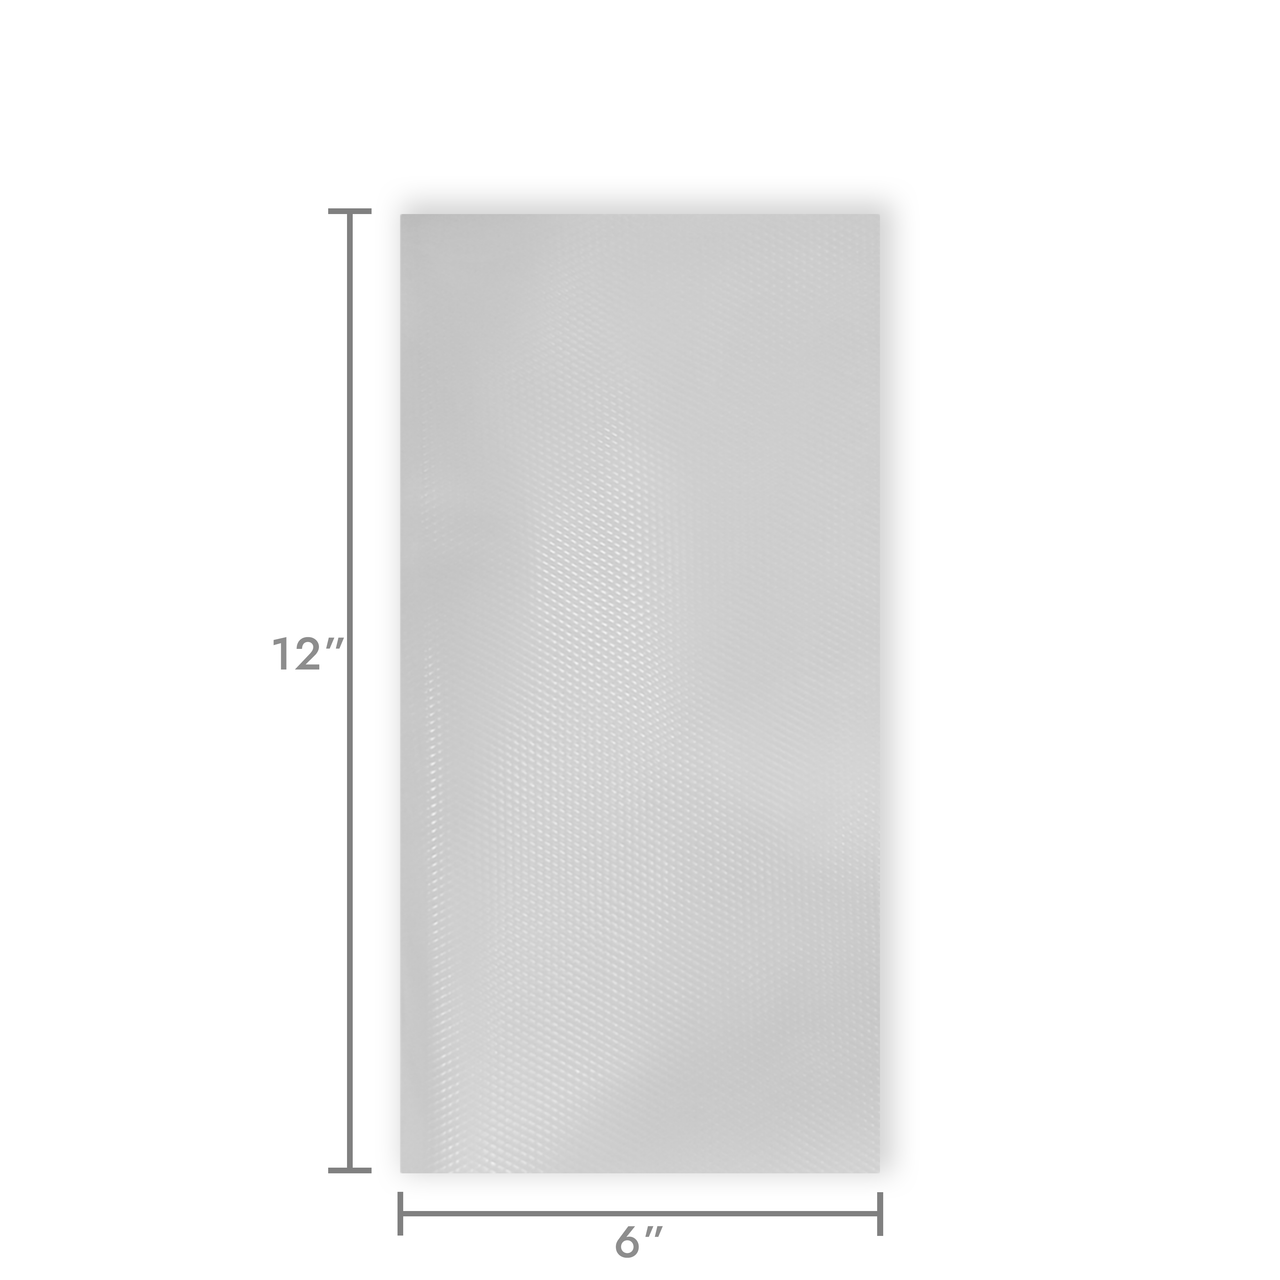 https://cdn11.bigcommerce.com/s-uyn0oyt/images/stencil/1280x1280/products/243/4133/Pint_Vacuum-Bag_Dimensions_White_Shadow__73235.1698711747.png?c=2